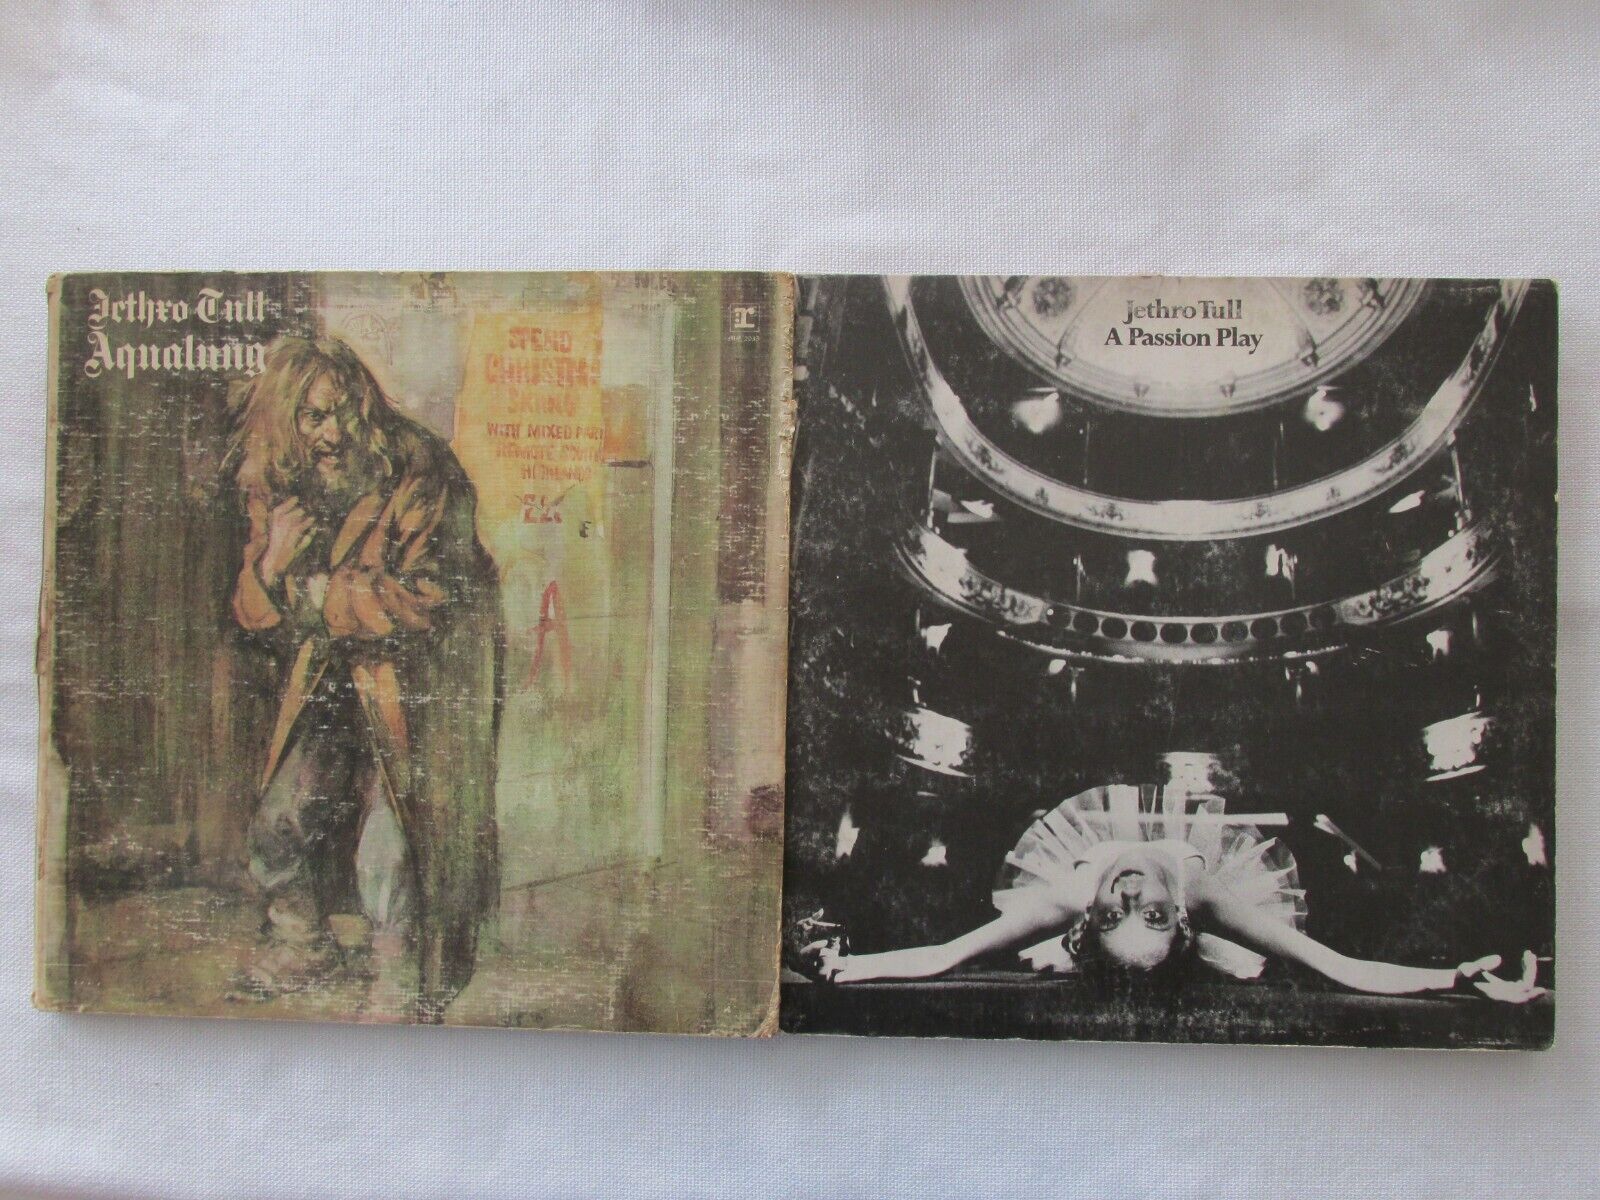 2 JETHRO TULL Vinyl LPs - 'Aqualung' (G+ to VG) & 'A Passion Play' (VG to VG+)